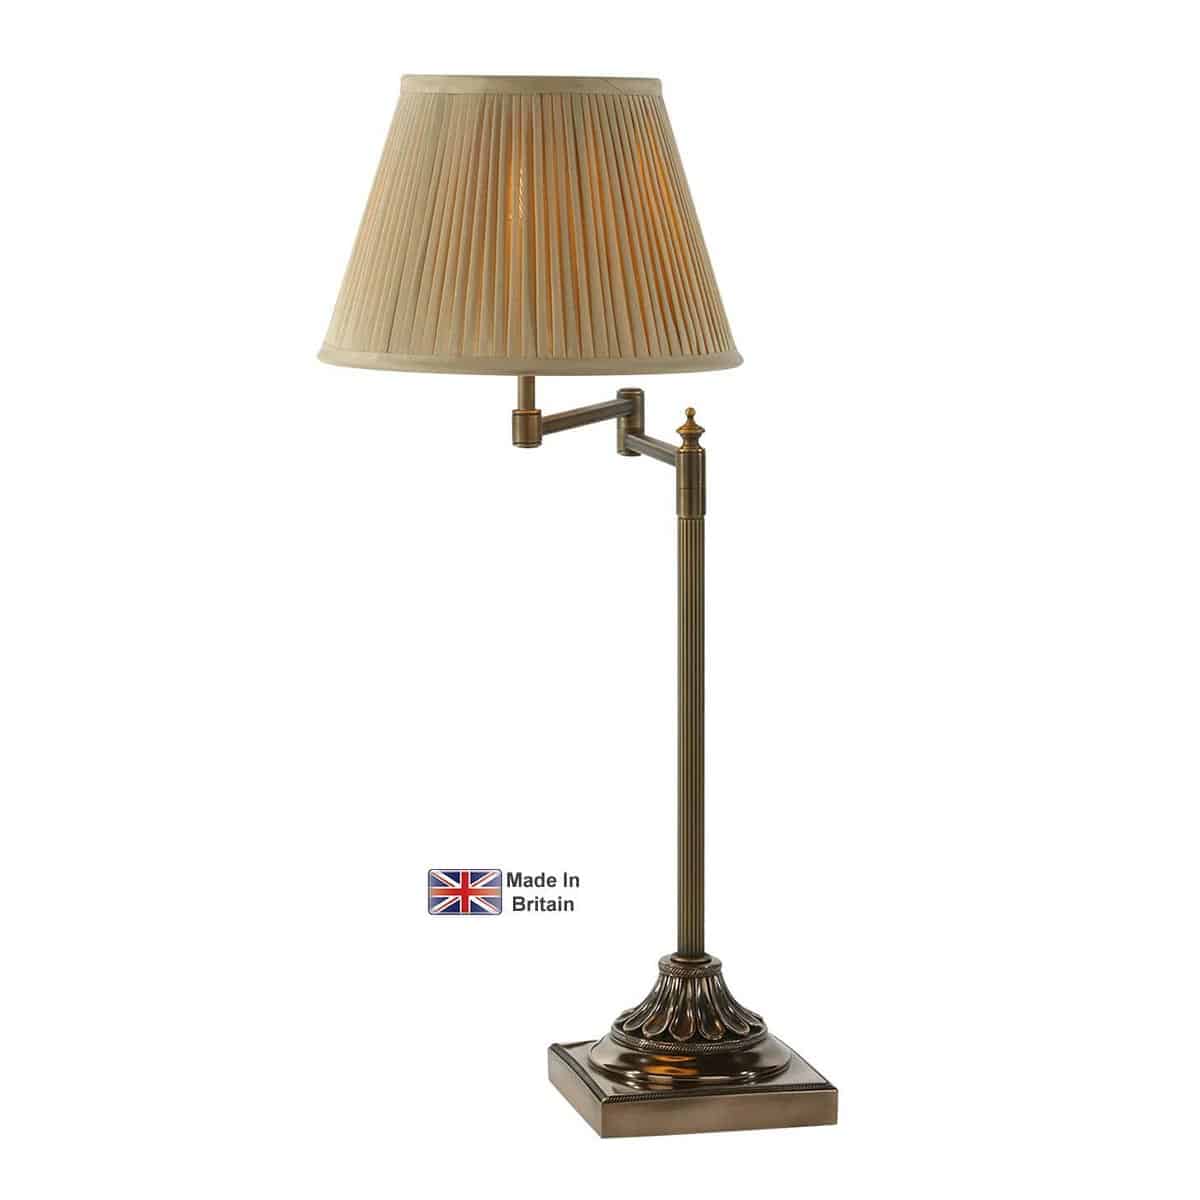 Pimlico Swing Arm Table Lamp Solid Antique Brass Base Only